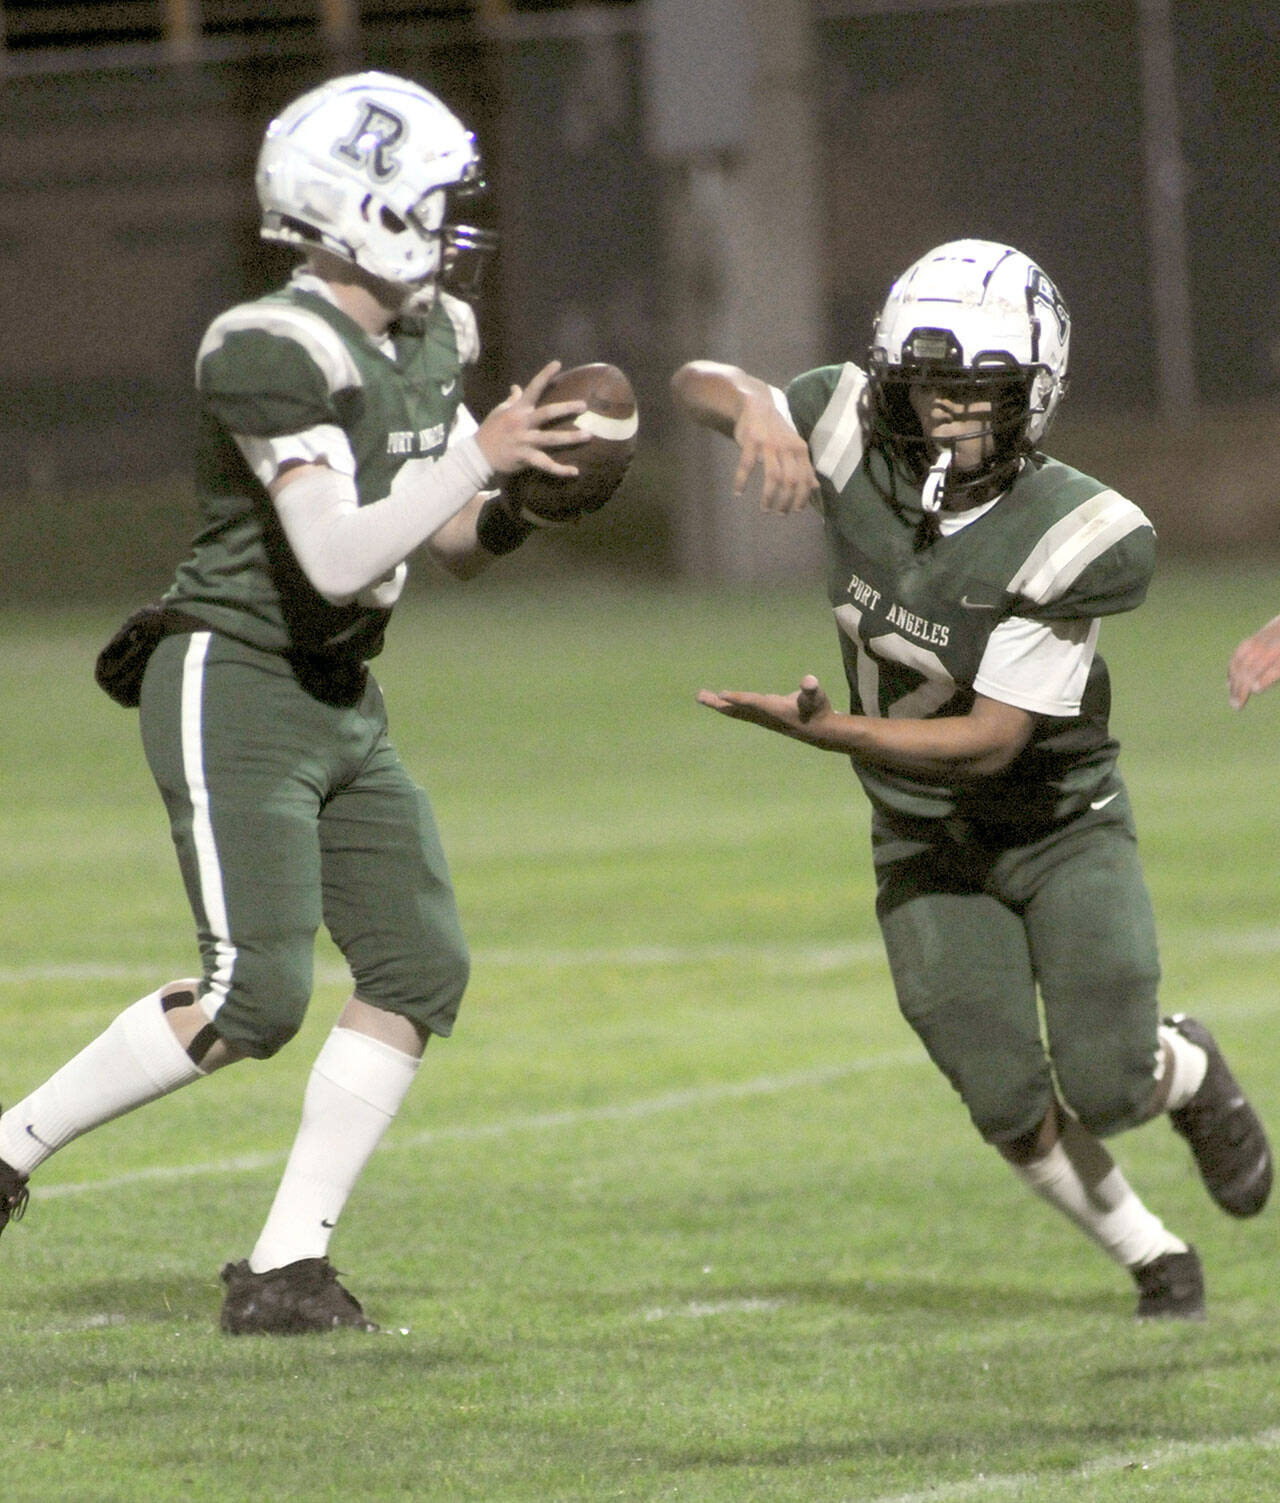 Port Angeles reserve quarterback Brandt Perry fakes a handoff to teammate Kason Albaugh before competing a touchdown pass to Blake Sohlberg in the fourth quarter Friday in Port Angeles. (KEITH THORPE/PENINSULA DAILY NEWS)